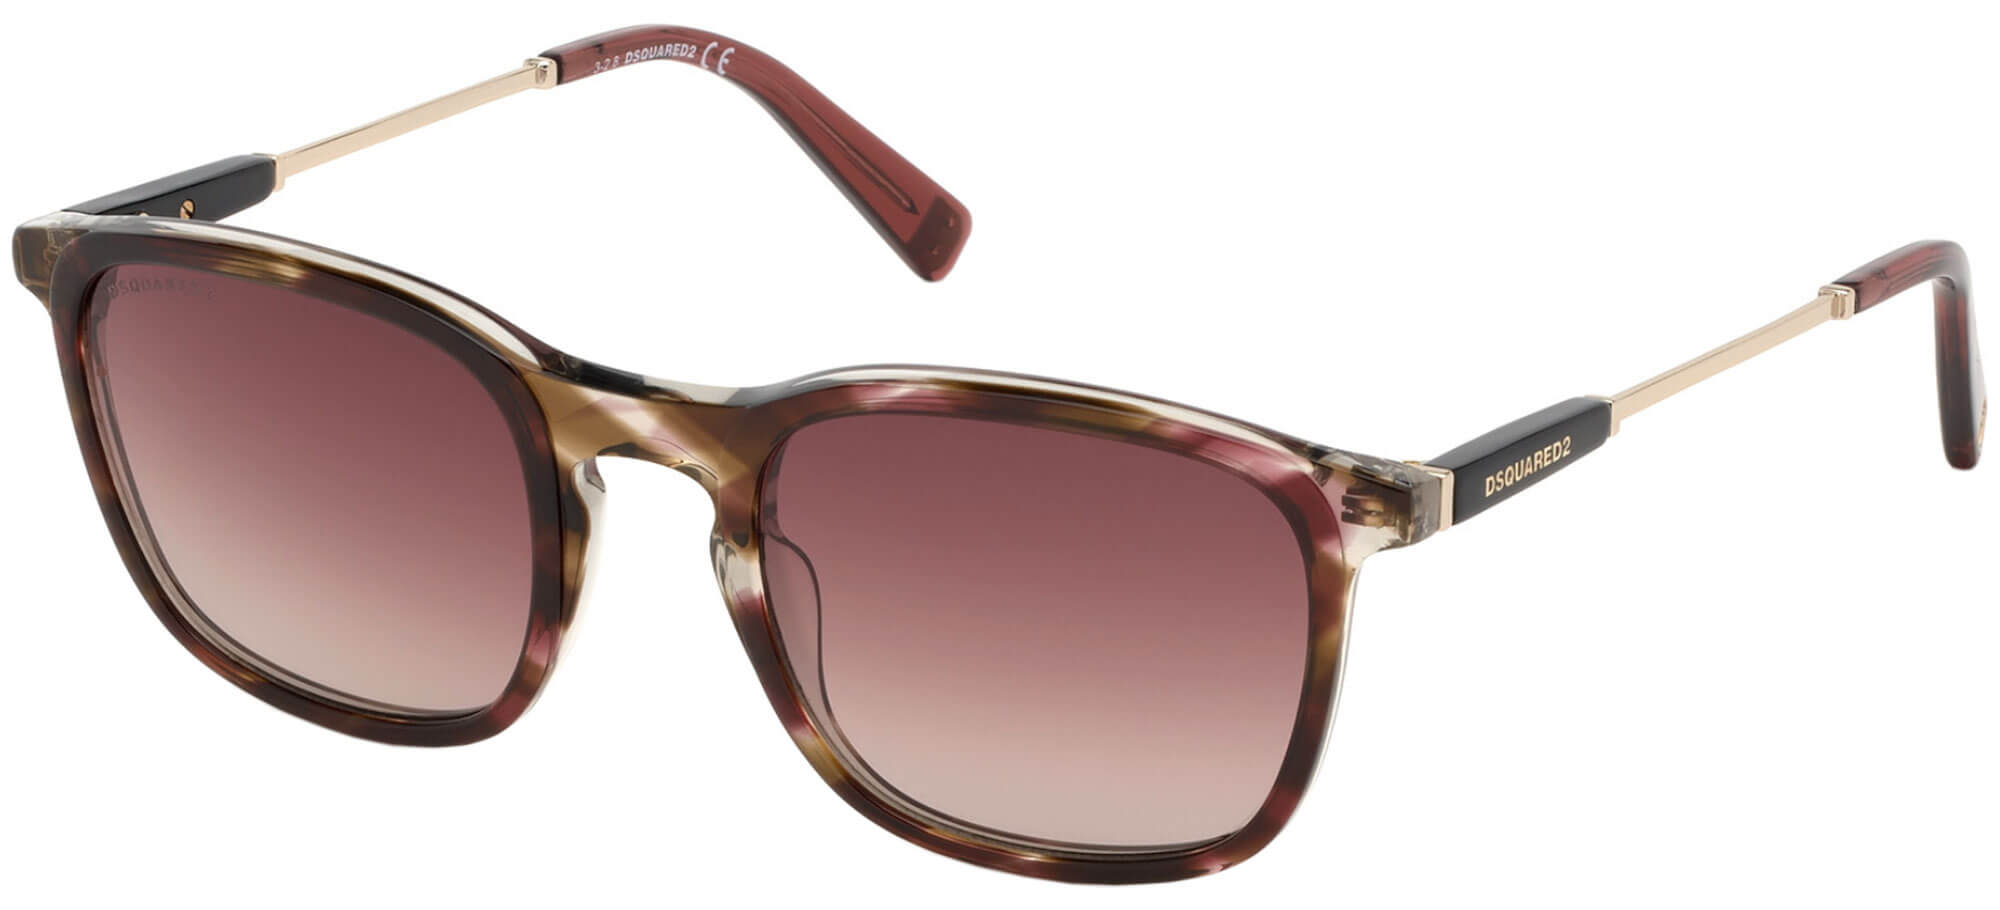 Dsquared2GEFFEN DQ 0326Striped Brown/red Shaded (71T C)